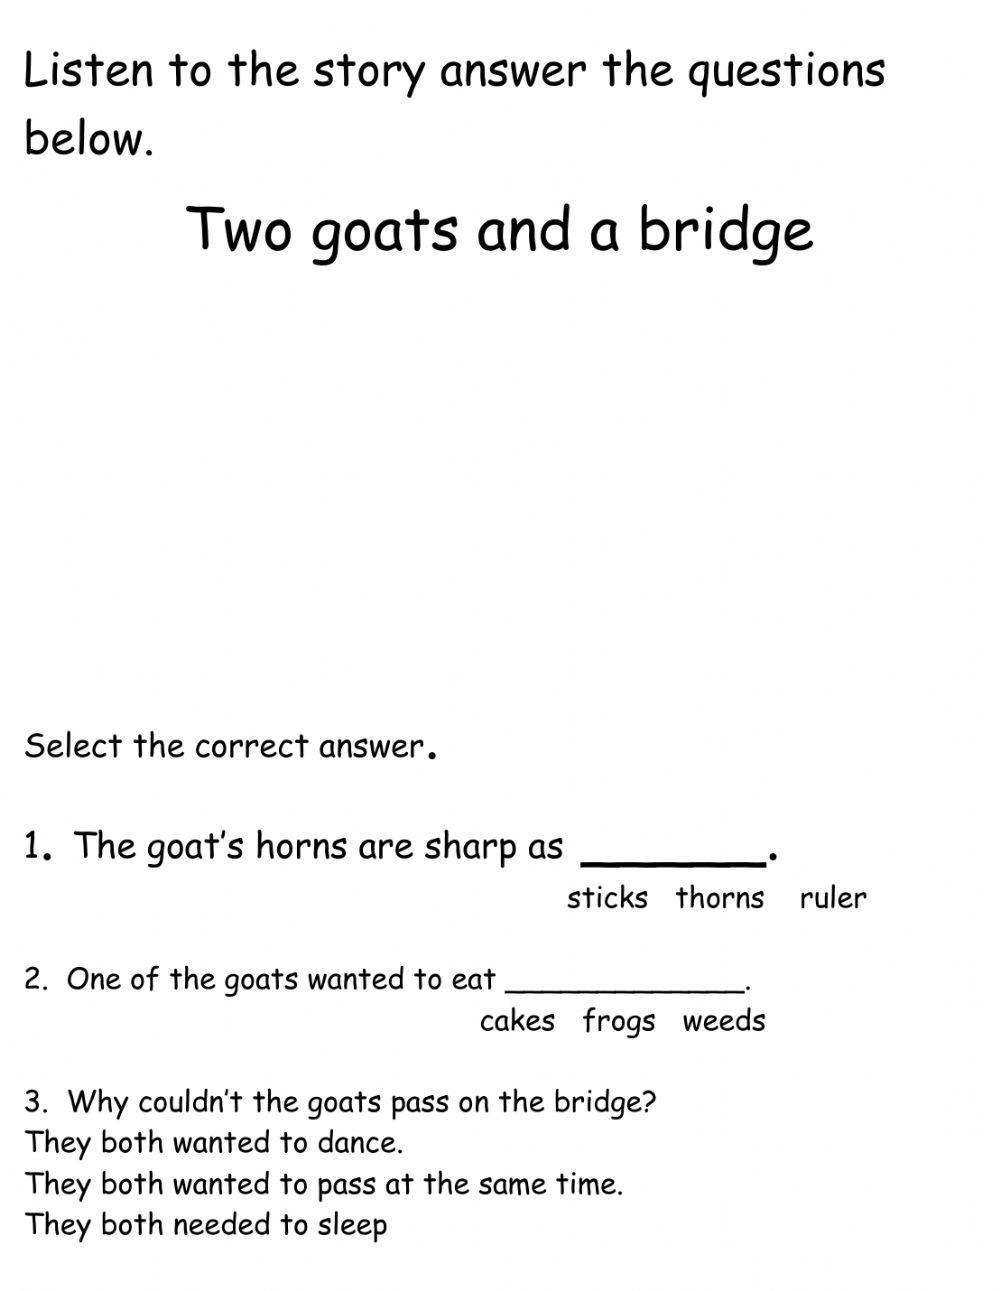 Two goats and a bridge